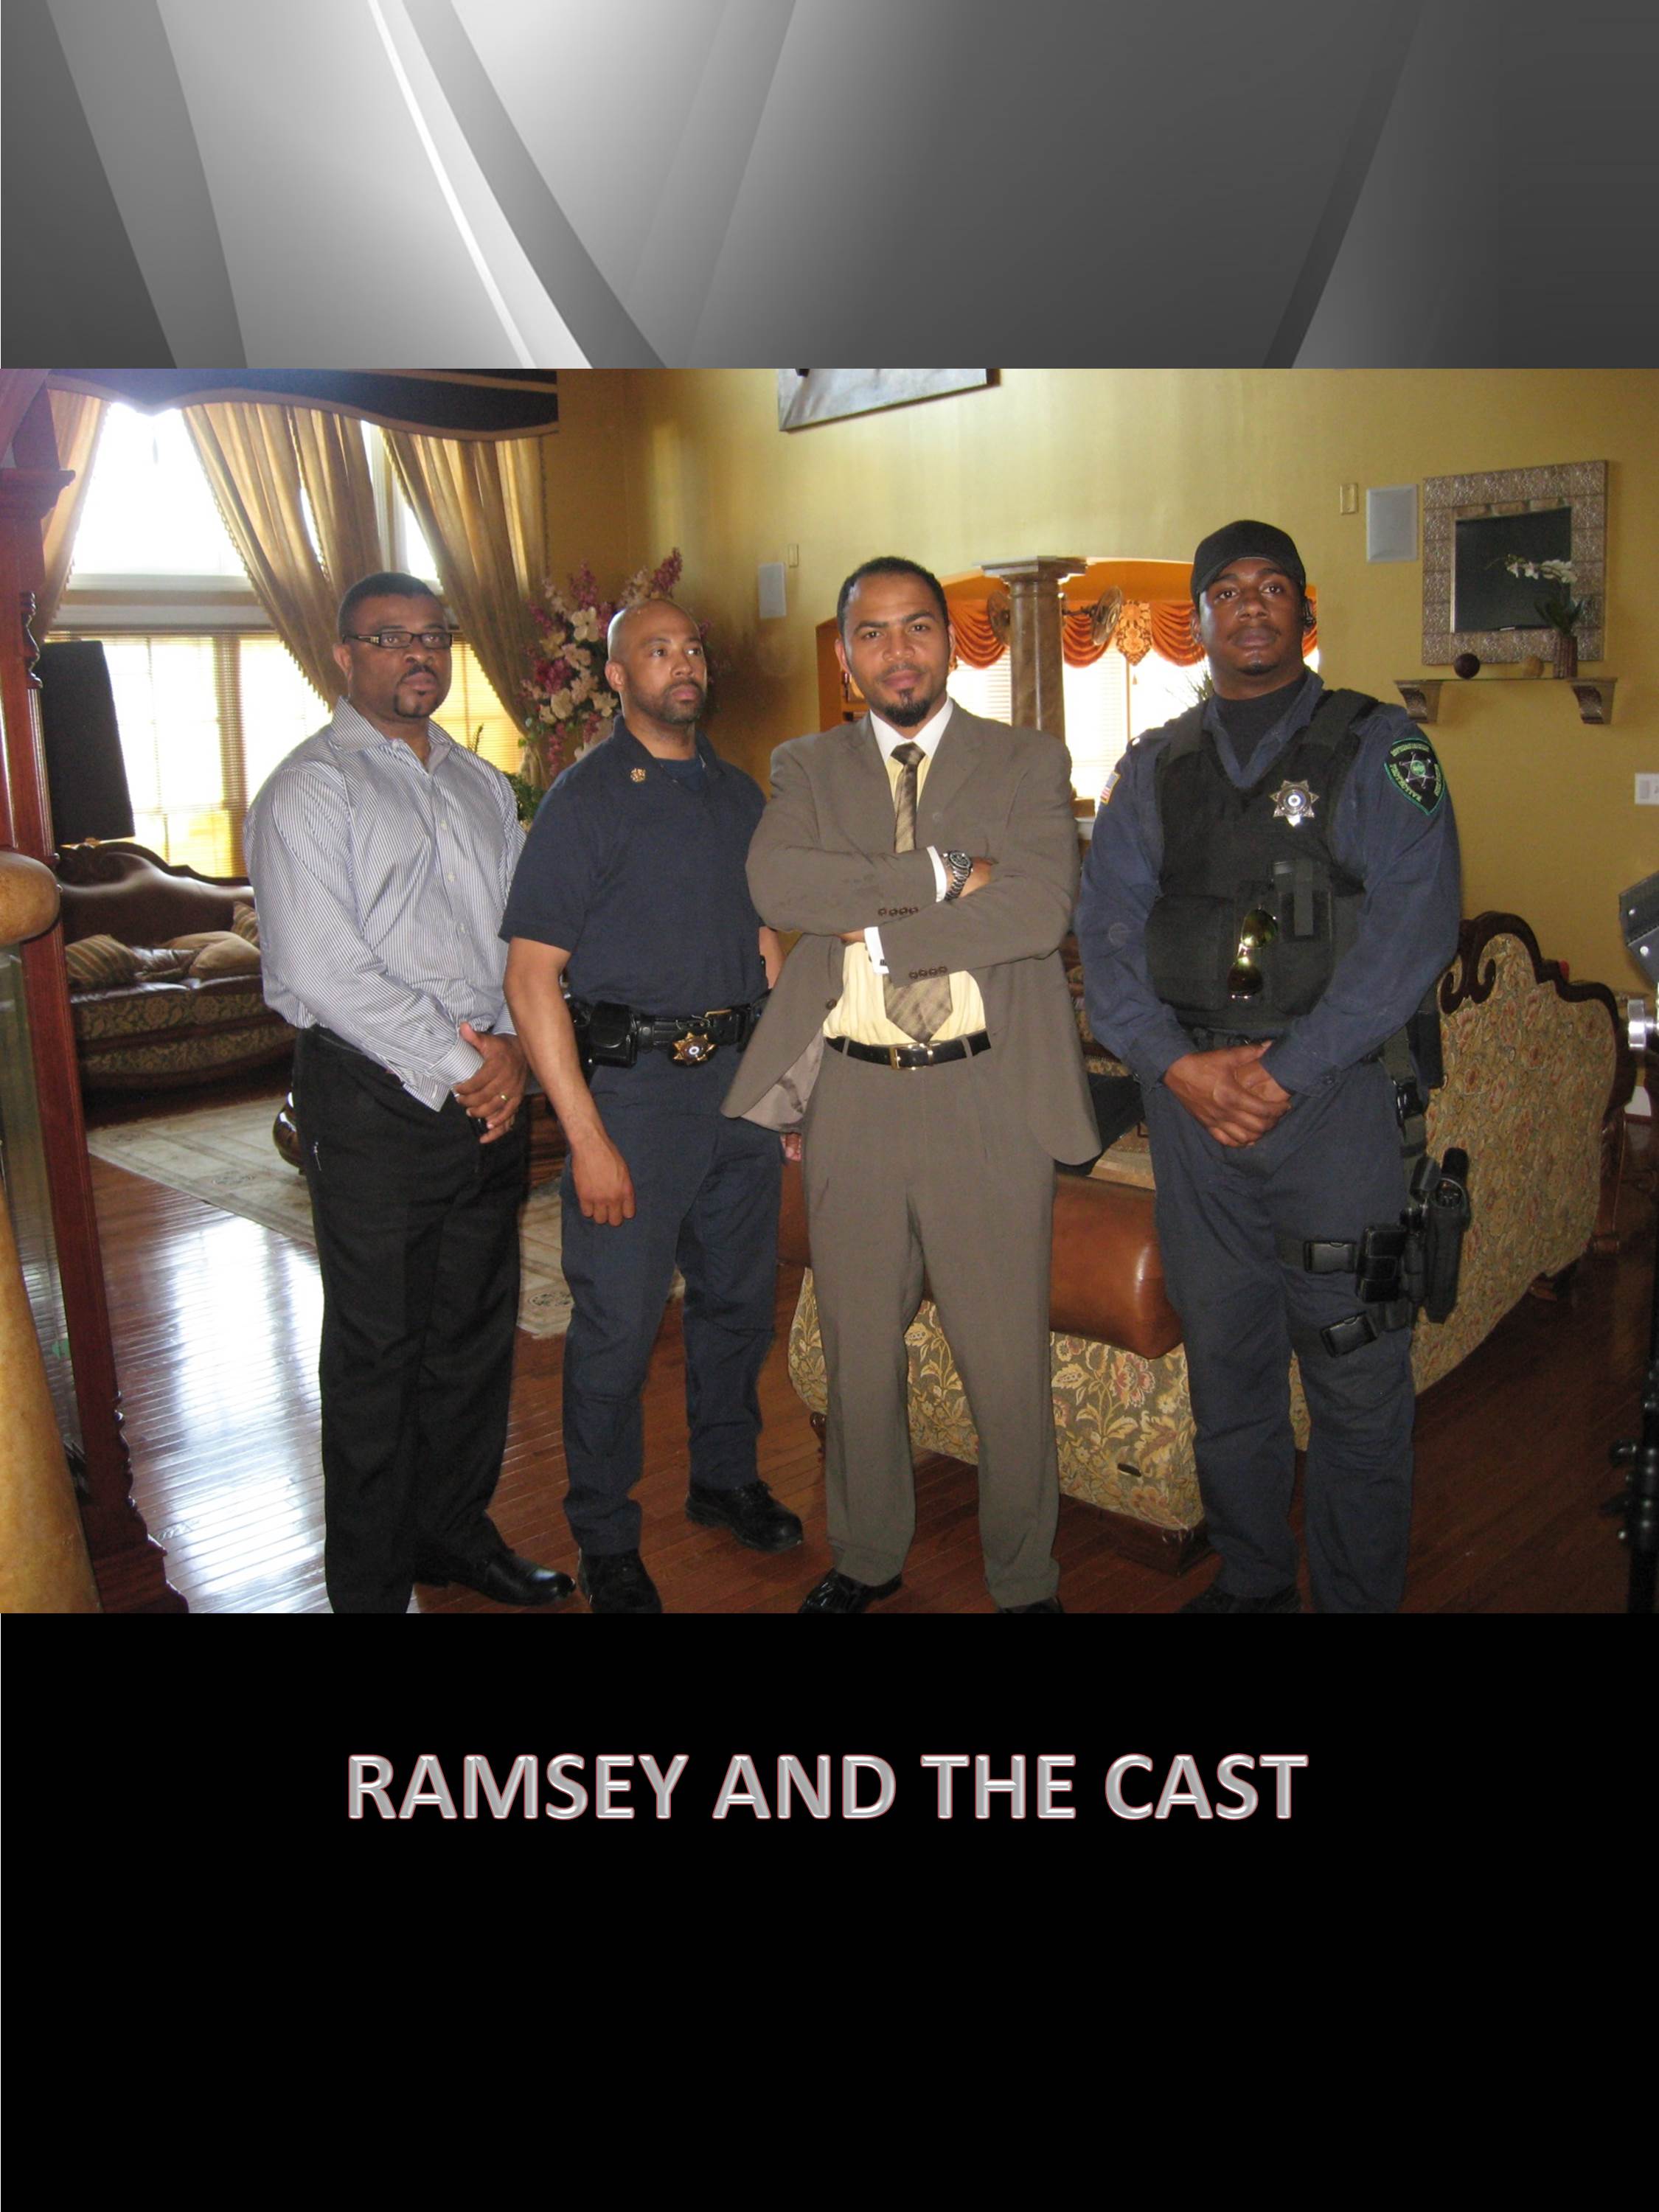 RAMSEY AND THE CAST